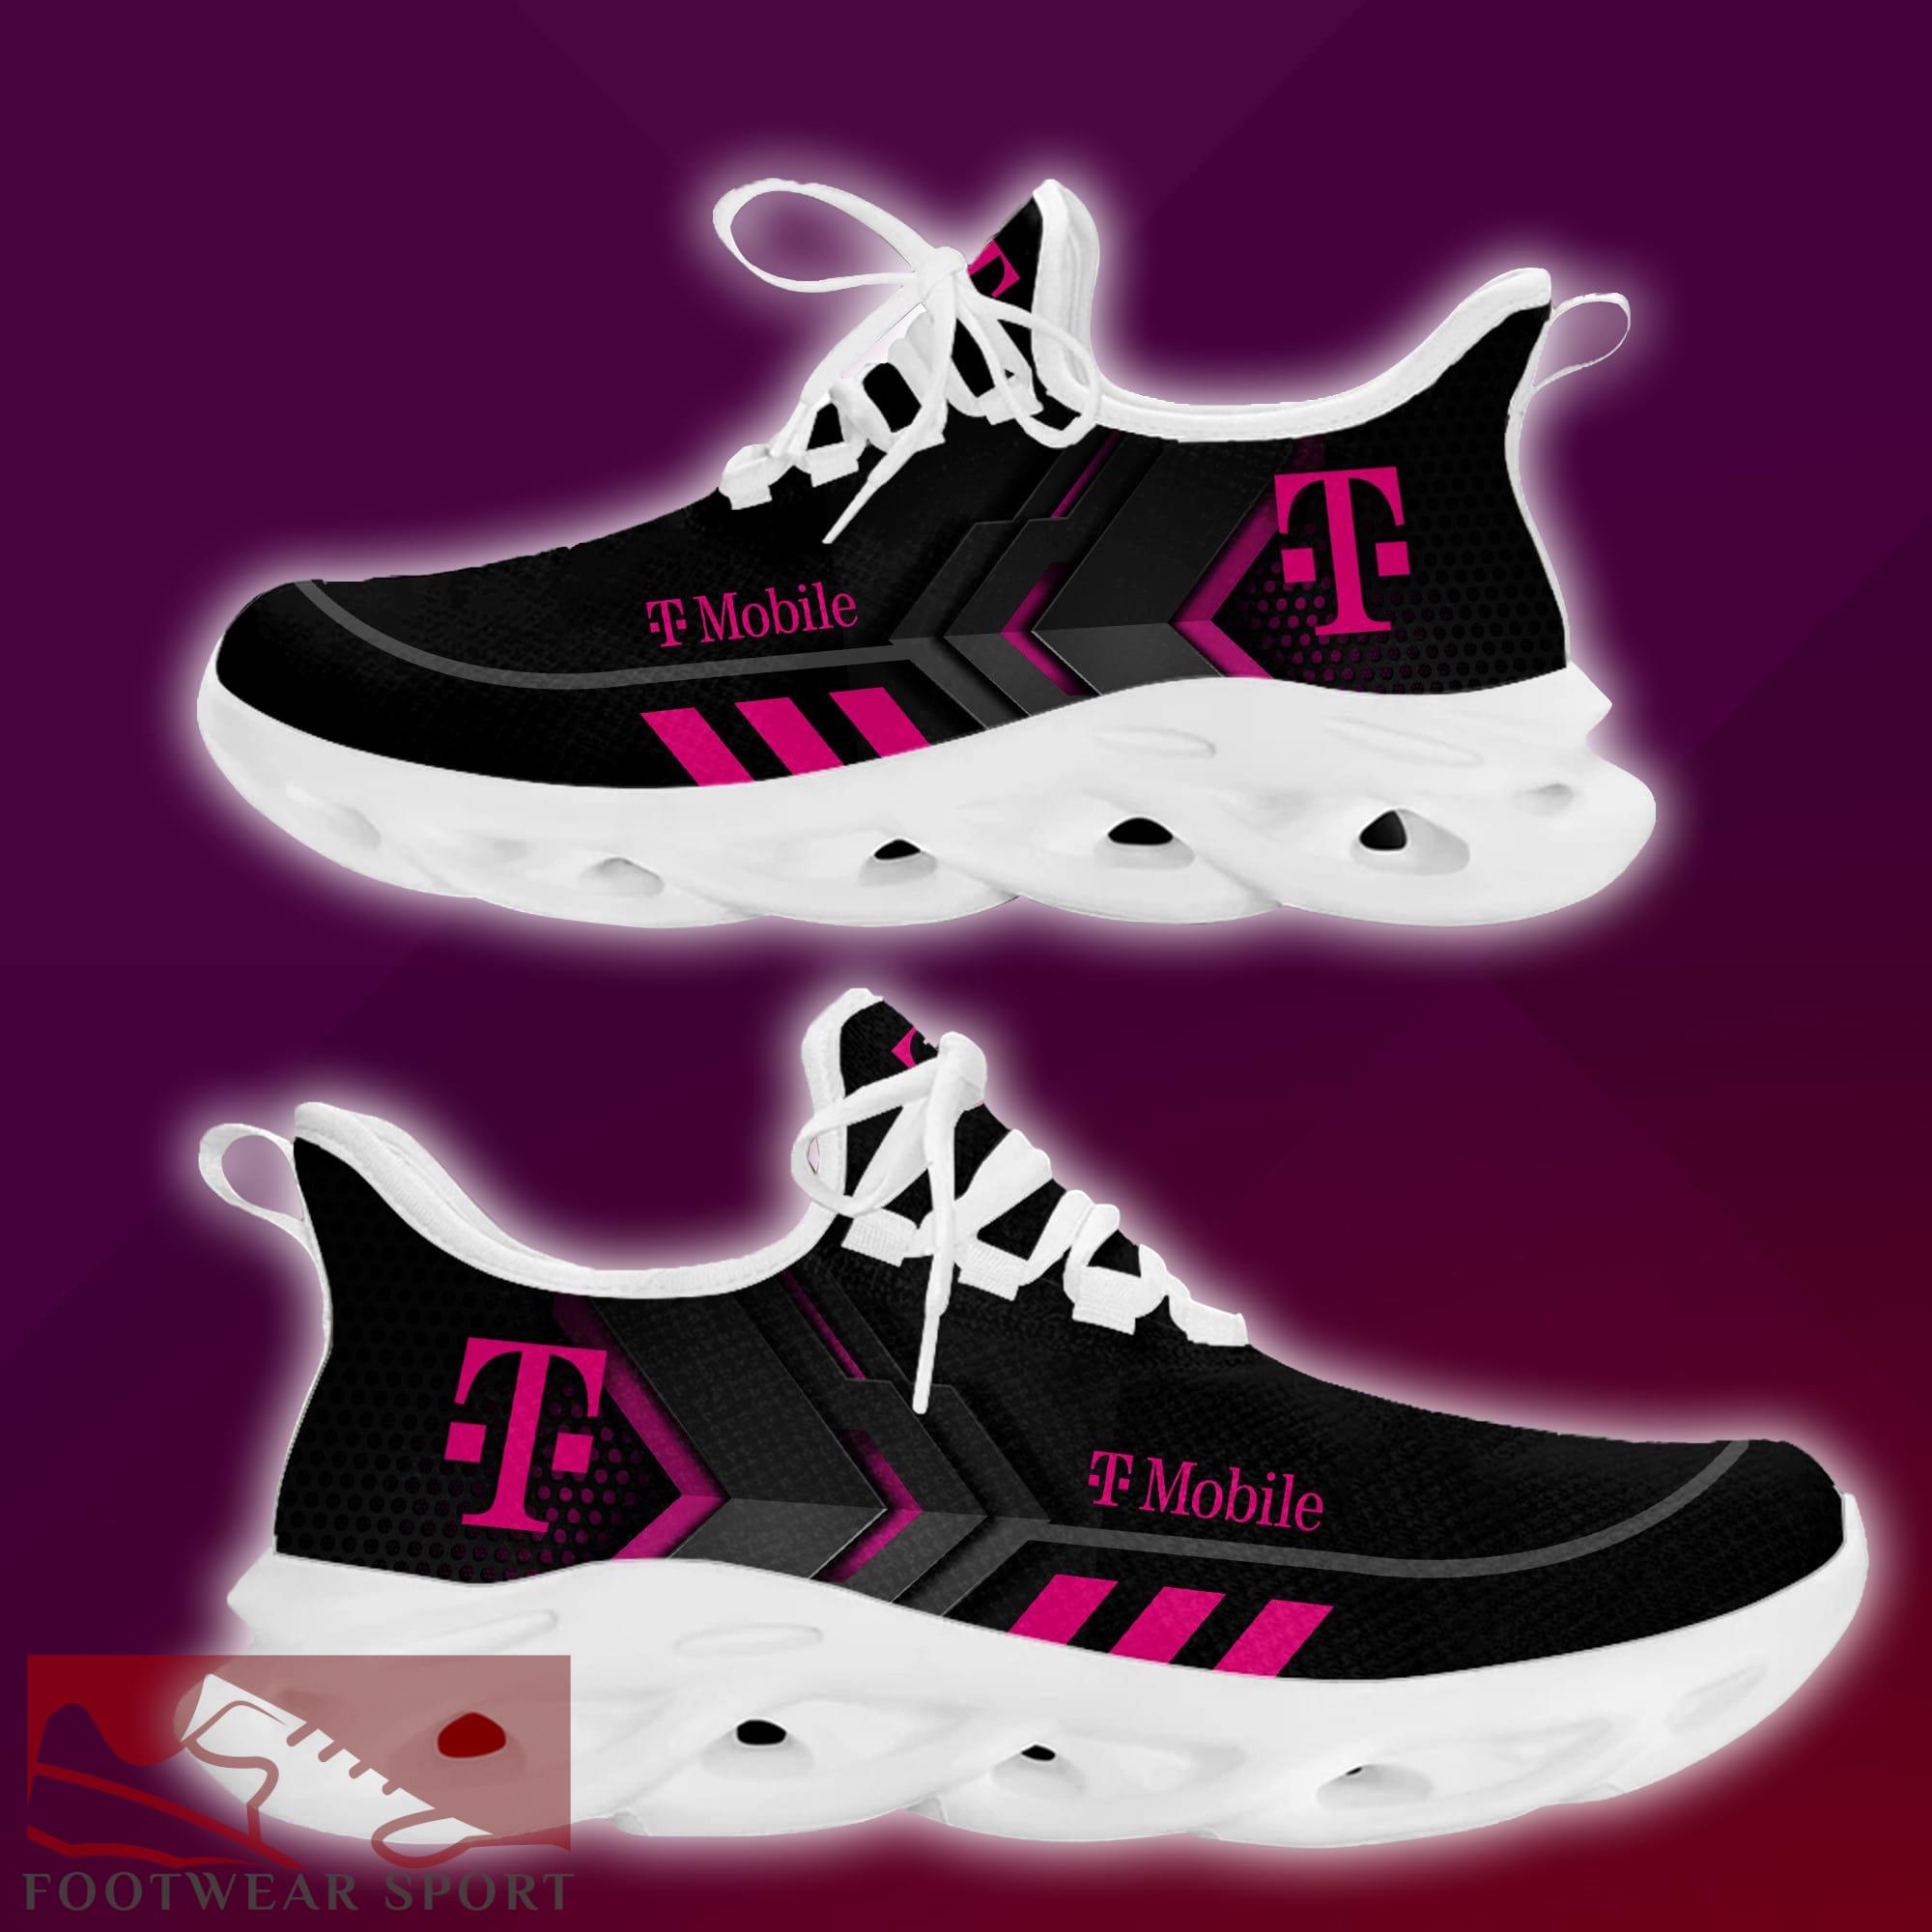 t-mobile Brand New Logo Max Soul Sneakers Vibe Sport Shoes Gift - t-mobile New Brand Chunky Shoes Style Max Soul Sneakers Photo 2